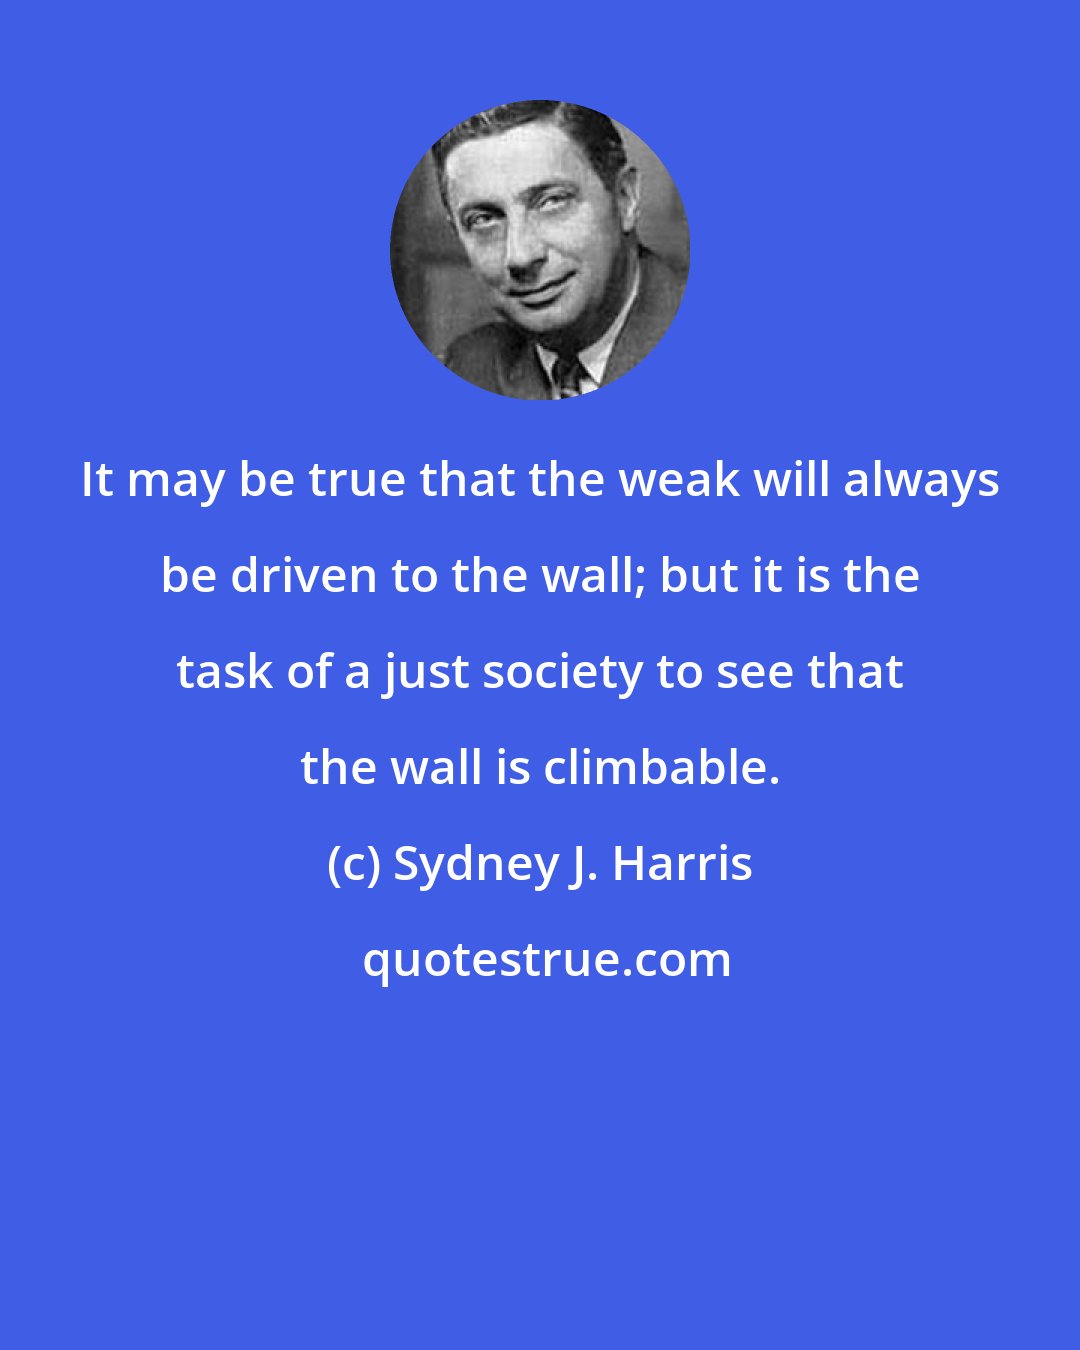 Sydney J. Harris: It may be true that the weak will always be driven to the wall; but it is the task of a just society to see that the wall is climbable.